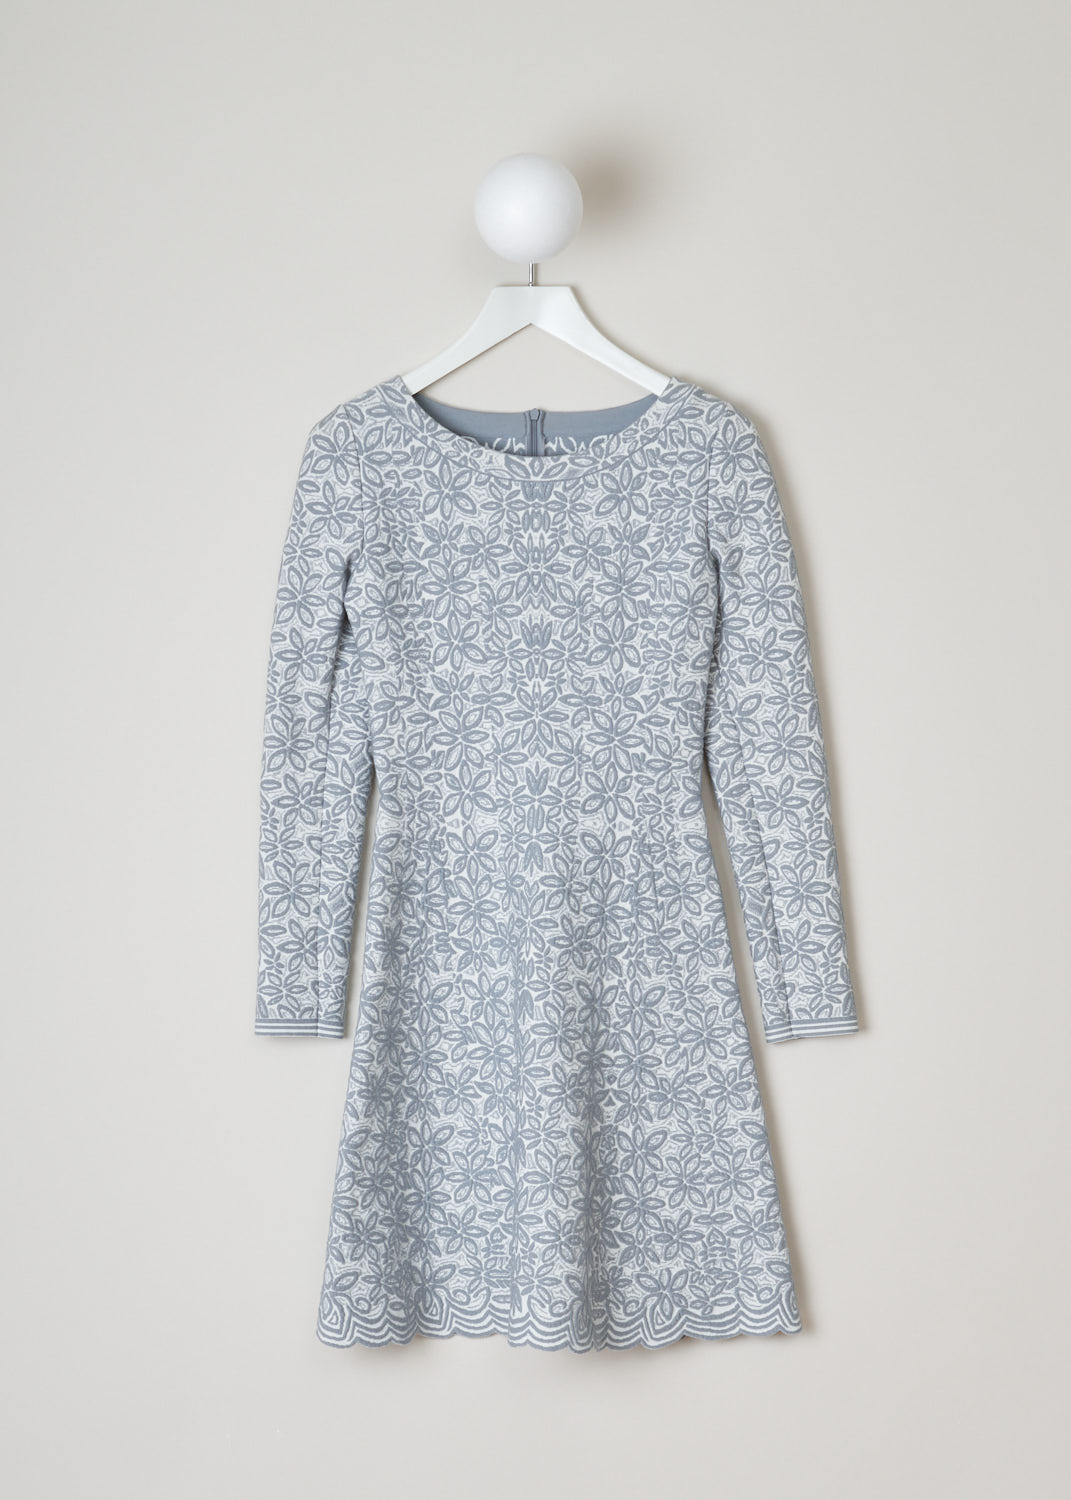 AlaÃ¯a, Grey floral princess dress, 7W9RI74CM353_robe_ml_courte_adenium_C051_blanc_gris, Grey White, Front. Grey stretchy mid-length dress, featuring a scoop neckline. The dress has long sleeves and a leafy print throughout. This model is made to be worn skin tight and has a soft pleat falling from waist-height. A concealed zipper can be found on the back. 